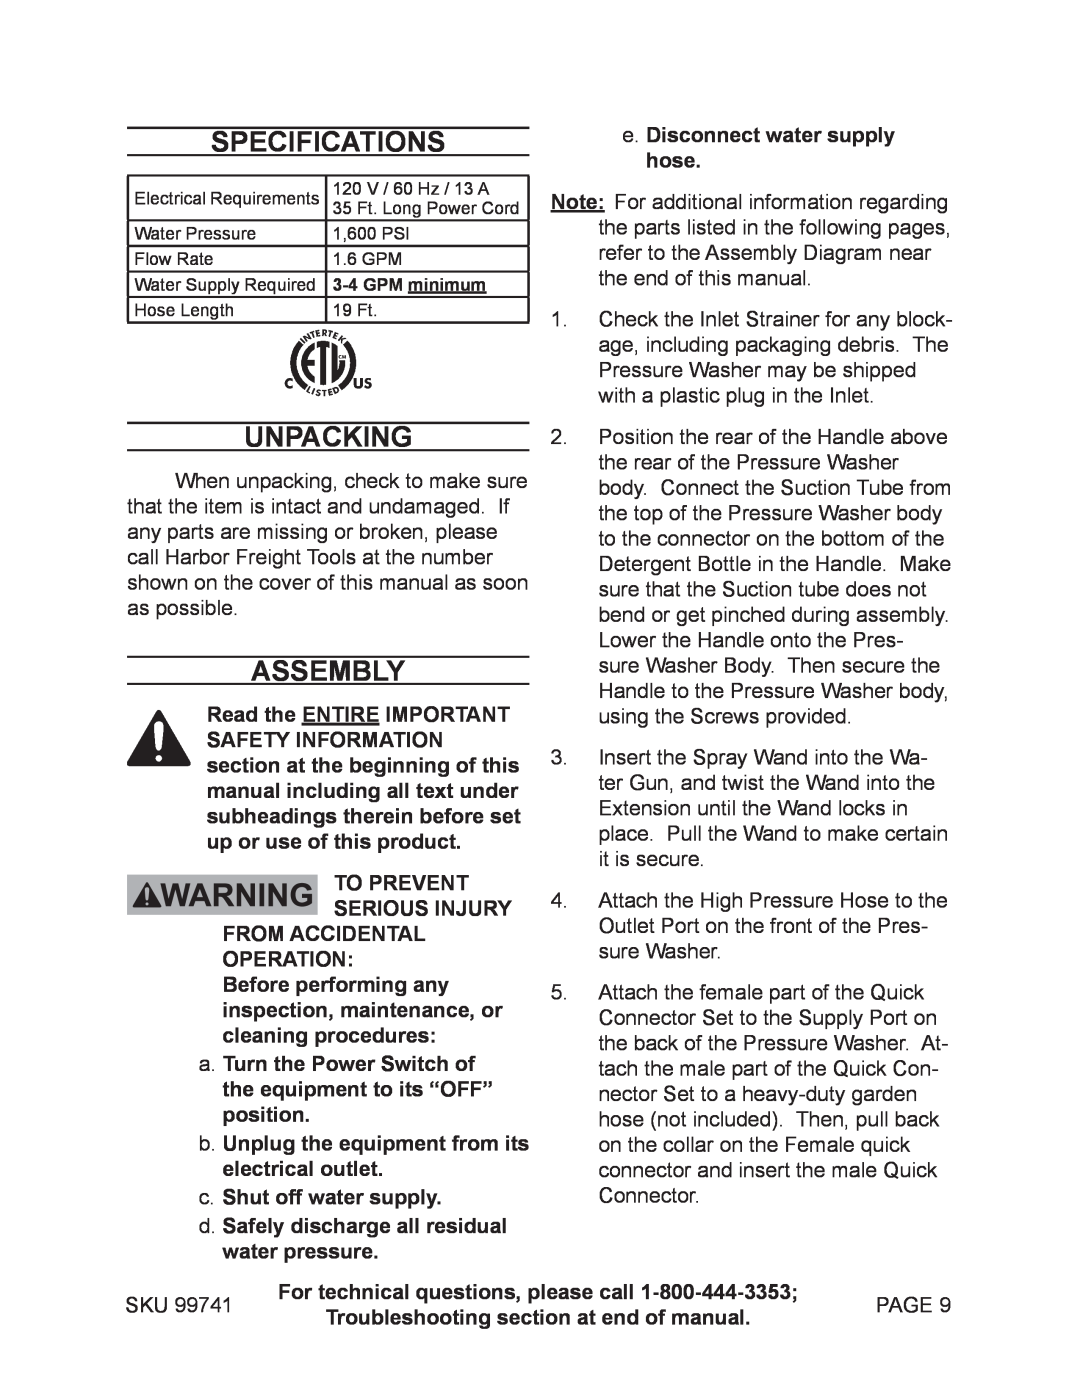 Harbor Freight Tools 99741 manual Specifications, Unpacking, Assembly 